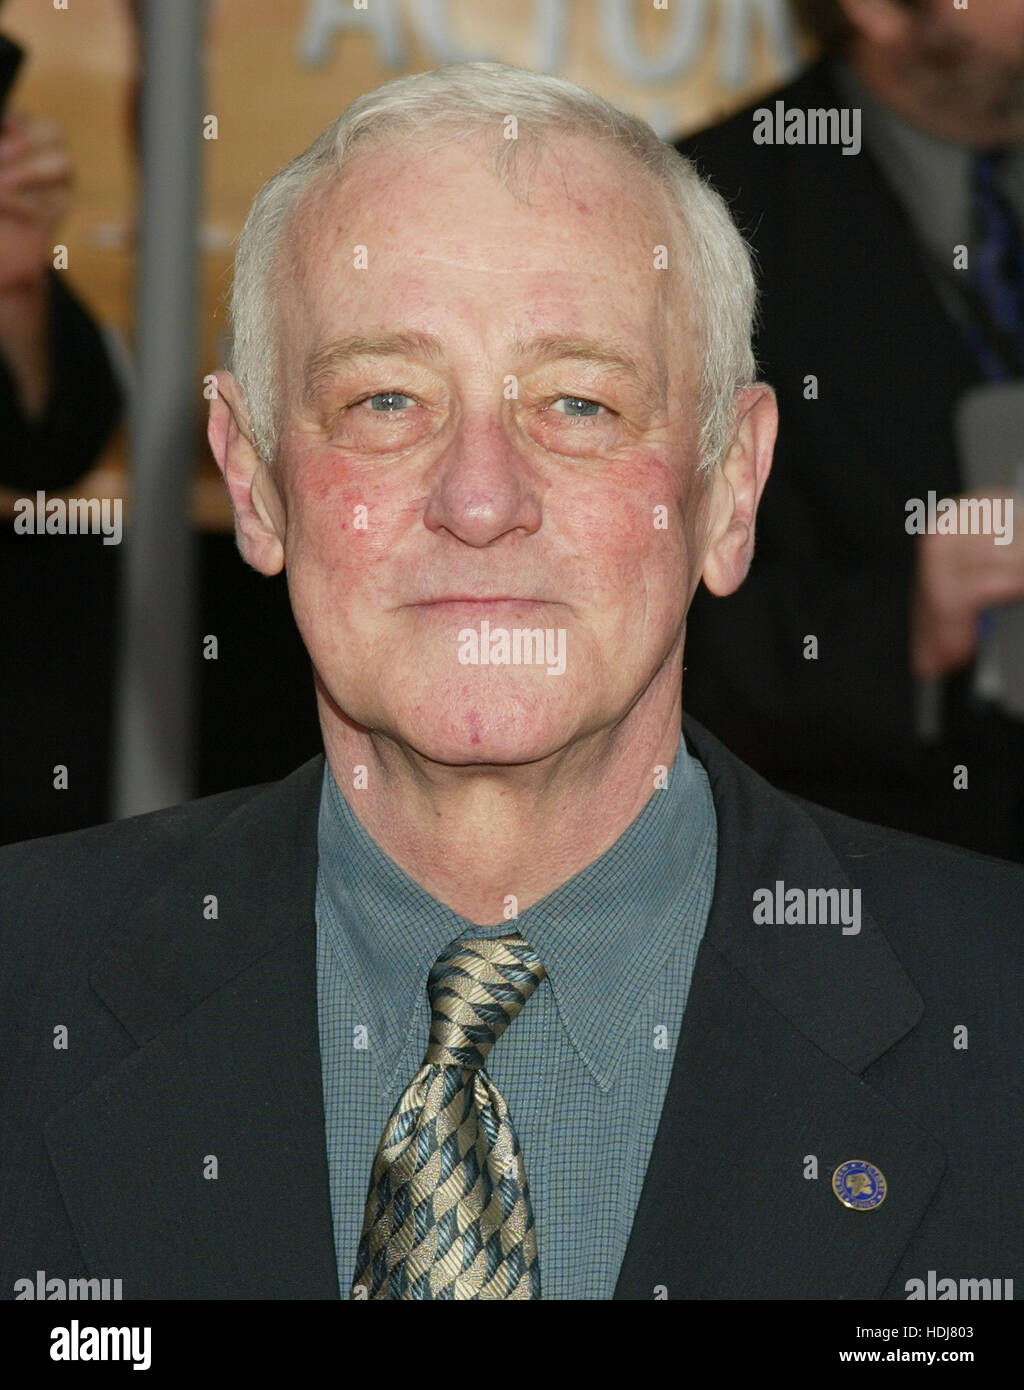 John Mahoney  arrives at the Screen Actors Guild Awards in Los Angeles, California on  February 22, 2004.  Photo credit: Francis Specker Stock Photo